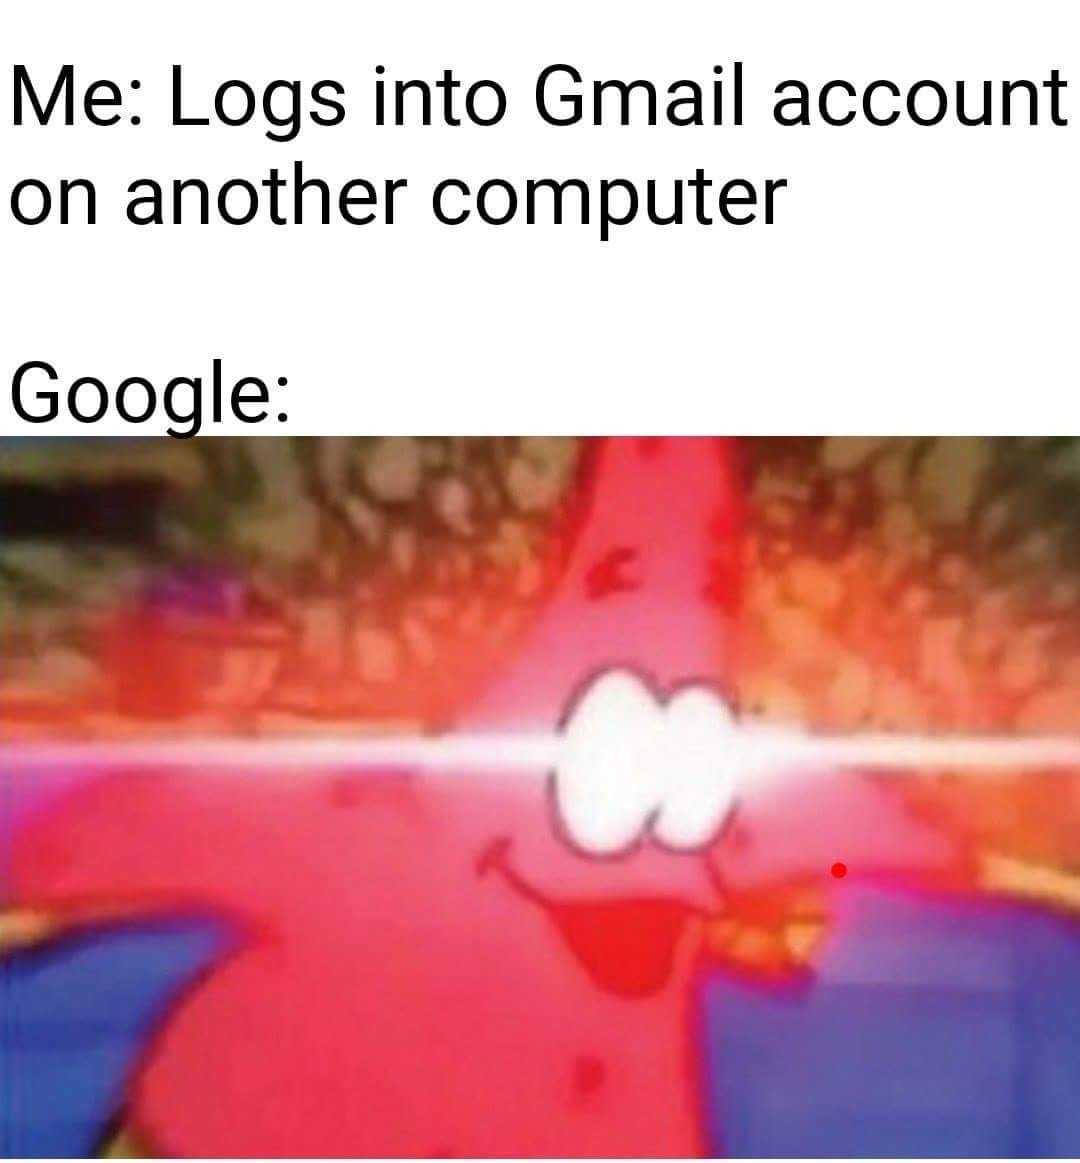 But what if you log into Google on another device, but Incognito?